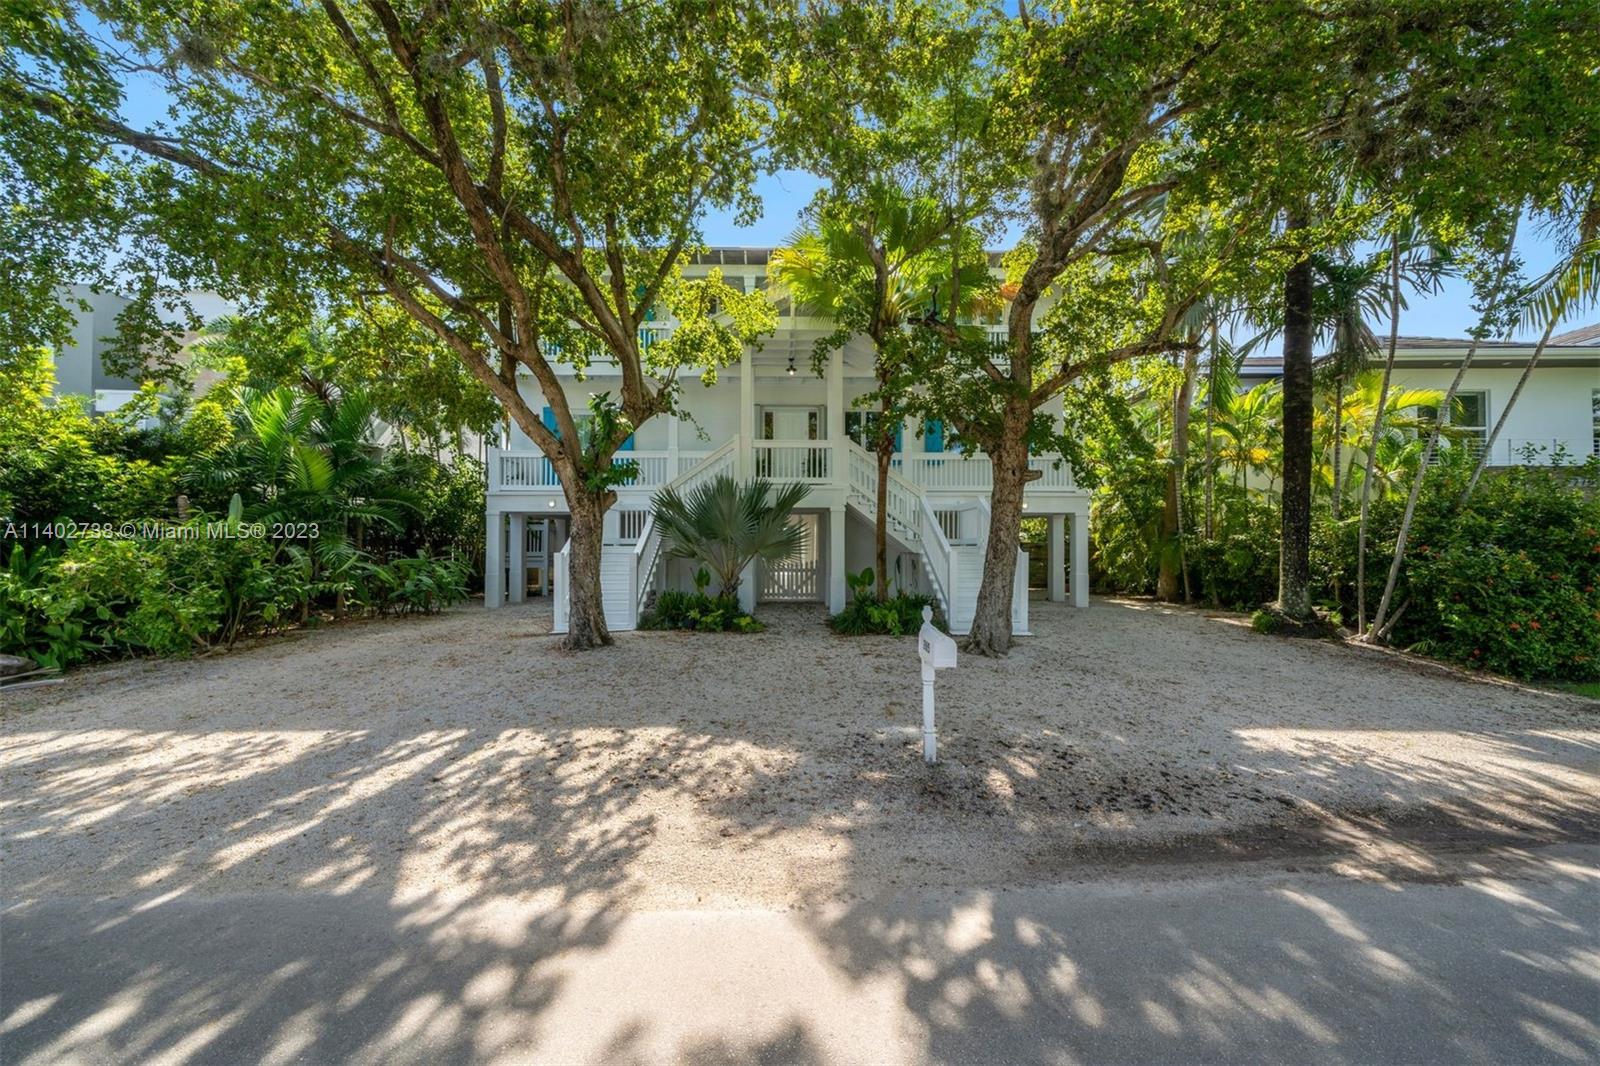 This gorgeous and unique home located on one of the quietest streets on Key Biscayne which sits on a 7841sqft lot features 4 bed and 4.5 baths, high ceilings and French doors create an airy and open ambiance and beautiful antique wood floors add a touch of warmth and timeless charm. The kitchen features custom cabinetry and built-ins. Highlights of this home include a spacious family room, which can easily be converted into a fifth bedroom, a wine cellar, and 2 expansive covered terraces ideal for entertaining, providing a seamless flow between the indoors and outdoors. The spacious main suite has a walk-in closet and a wraparound balcony. There is also a office space and potential area for a pool. 
A true gem in the coveted Key Biscayne combining luxury and the essence of coastal living.